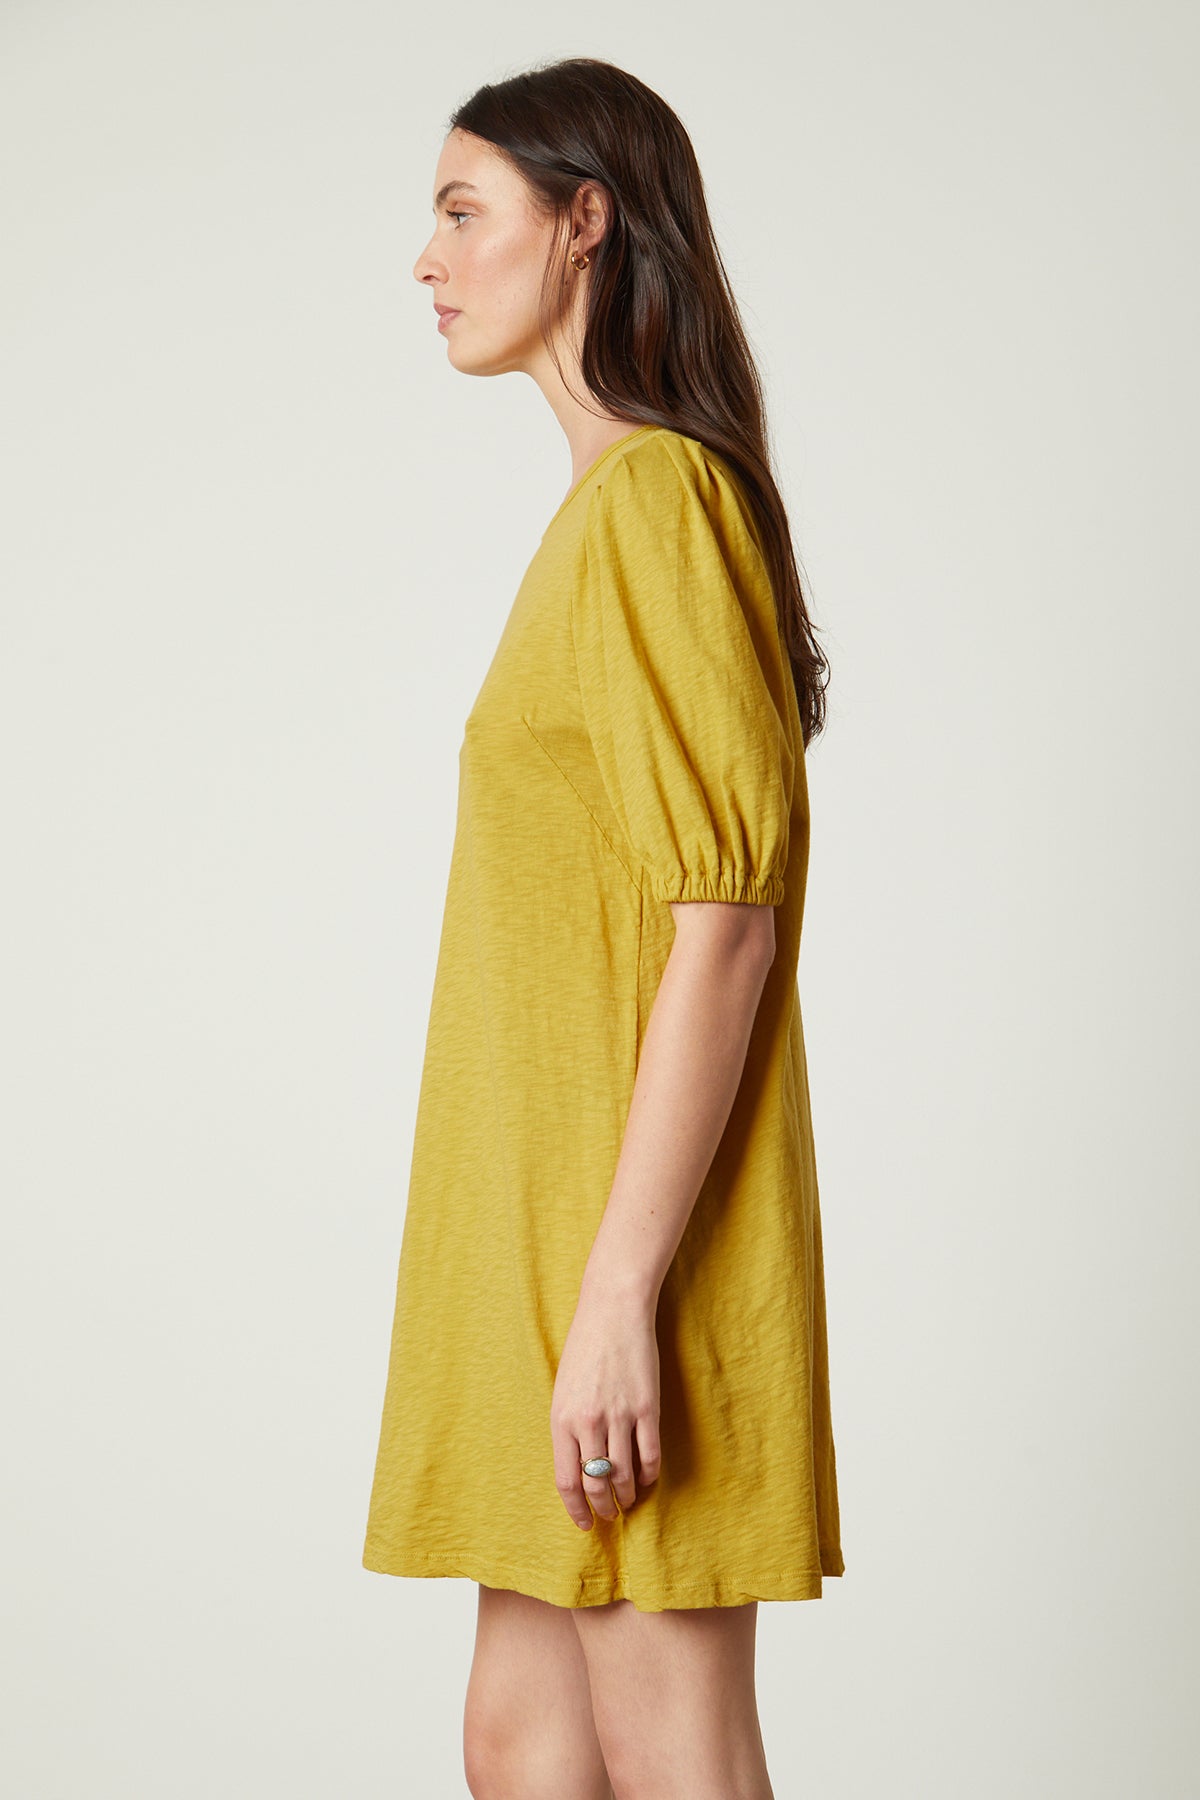 Meghan Dress in buttercup with puff sleeves side-26022634455233